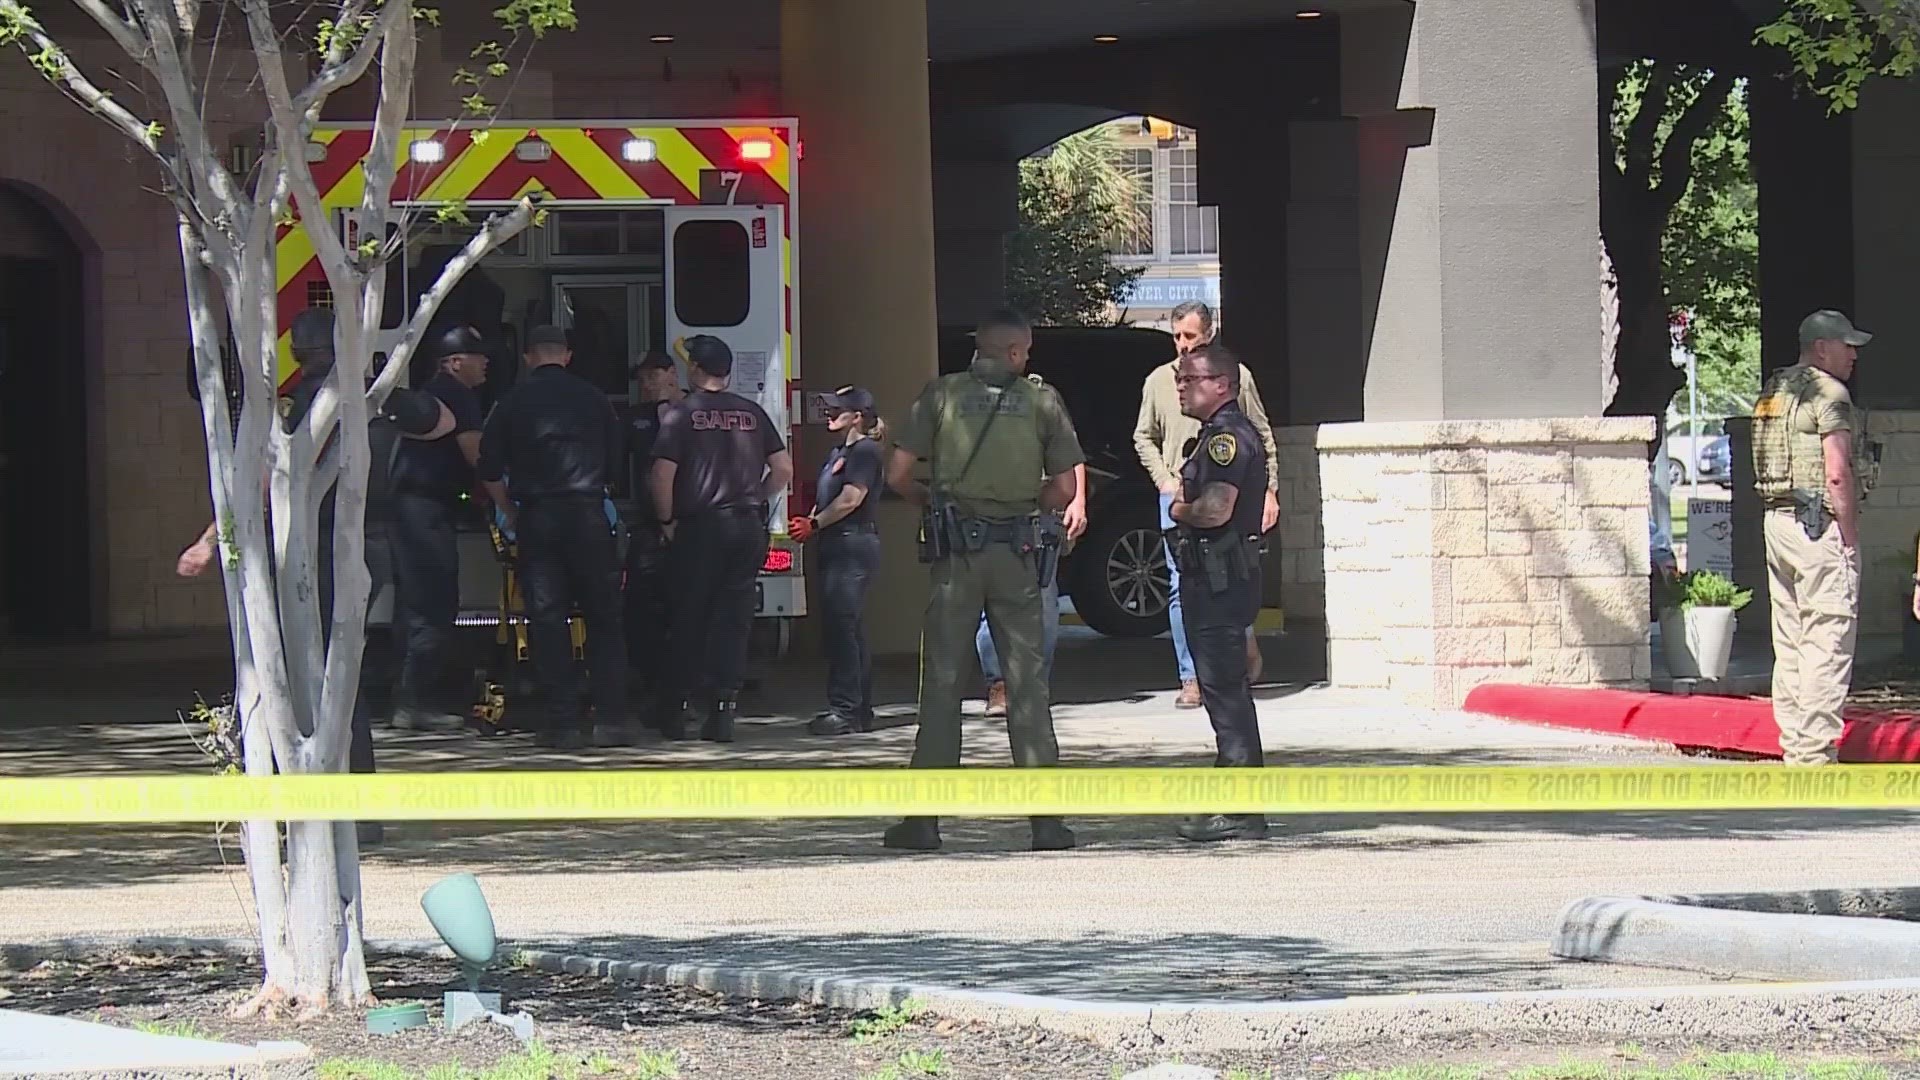 The Texas Rangers are investigating a deadly shooting involving the U.S. Marshals Task Force.